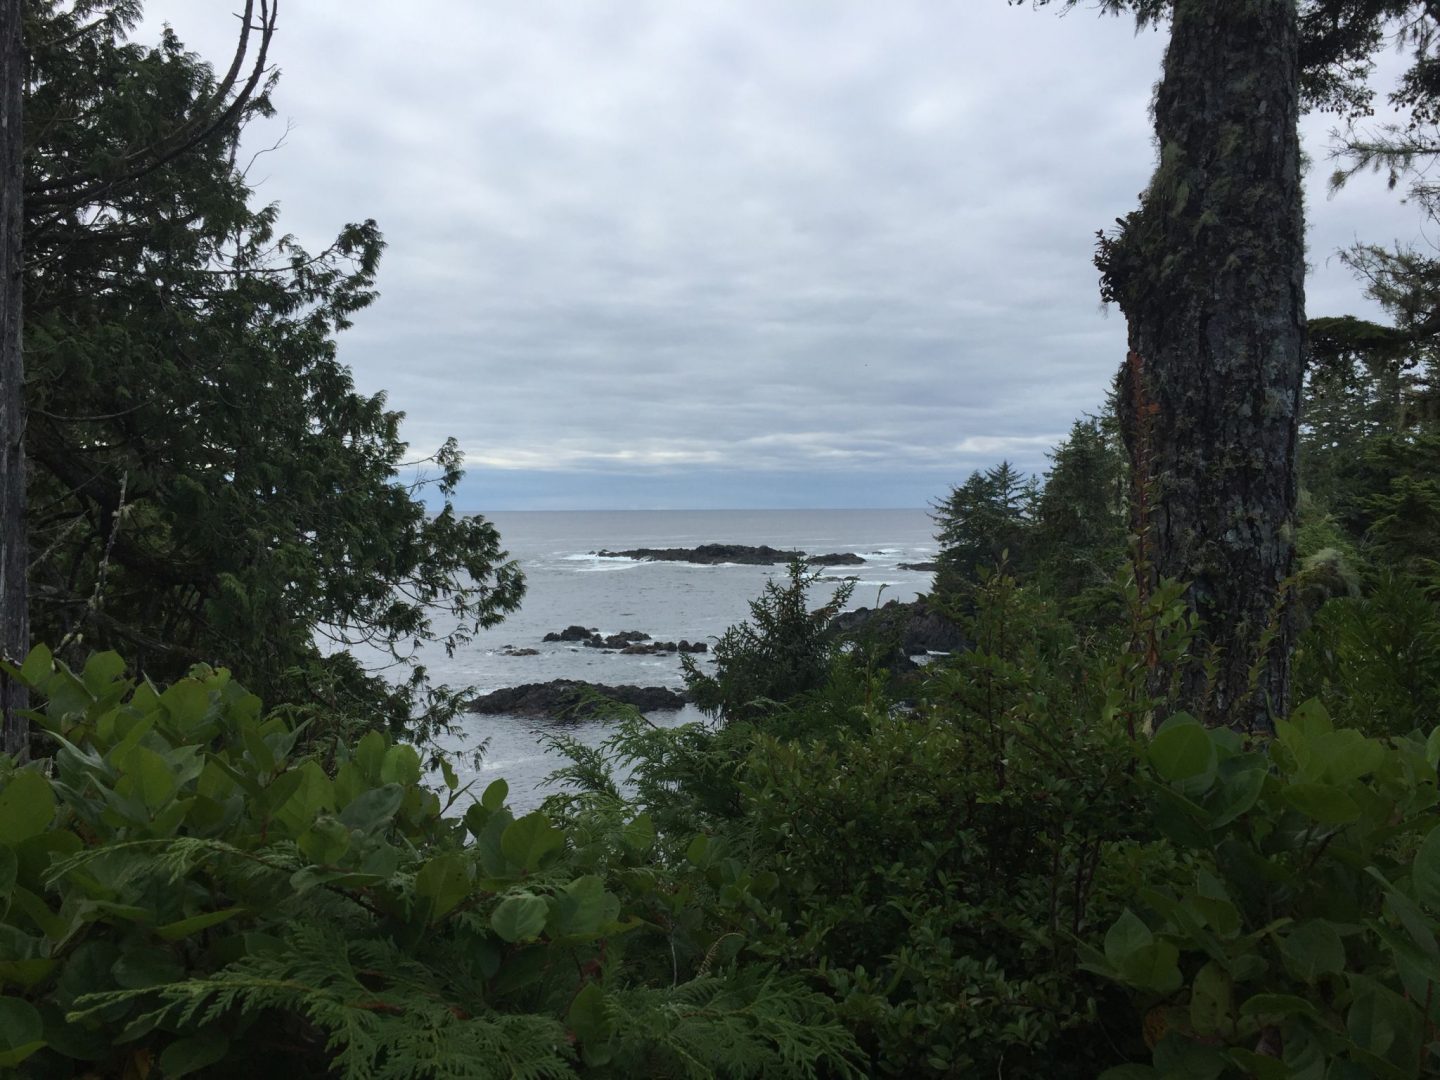 Ocean views and greenery on the Wild Pacific Trail, Vancouver Island